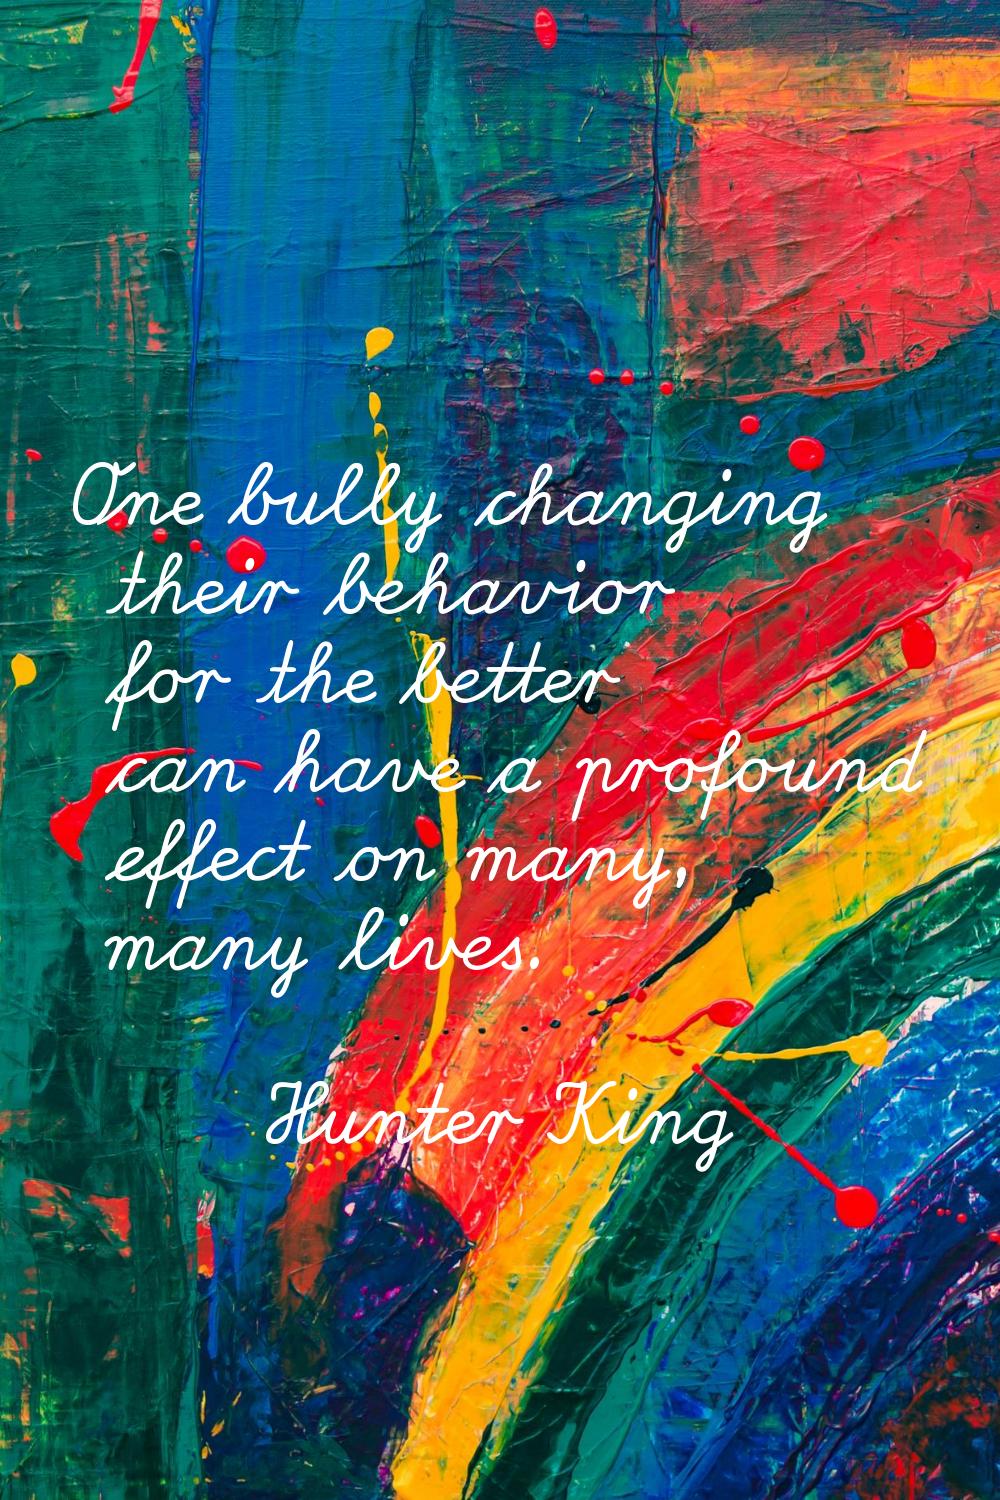 One bully changing their behavior for the better can have a profound effect on many, many lives.